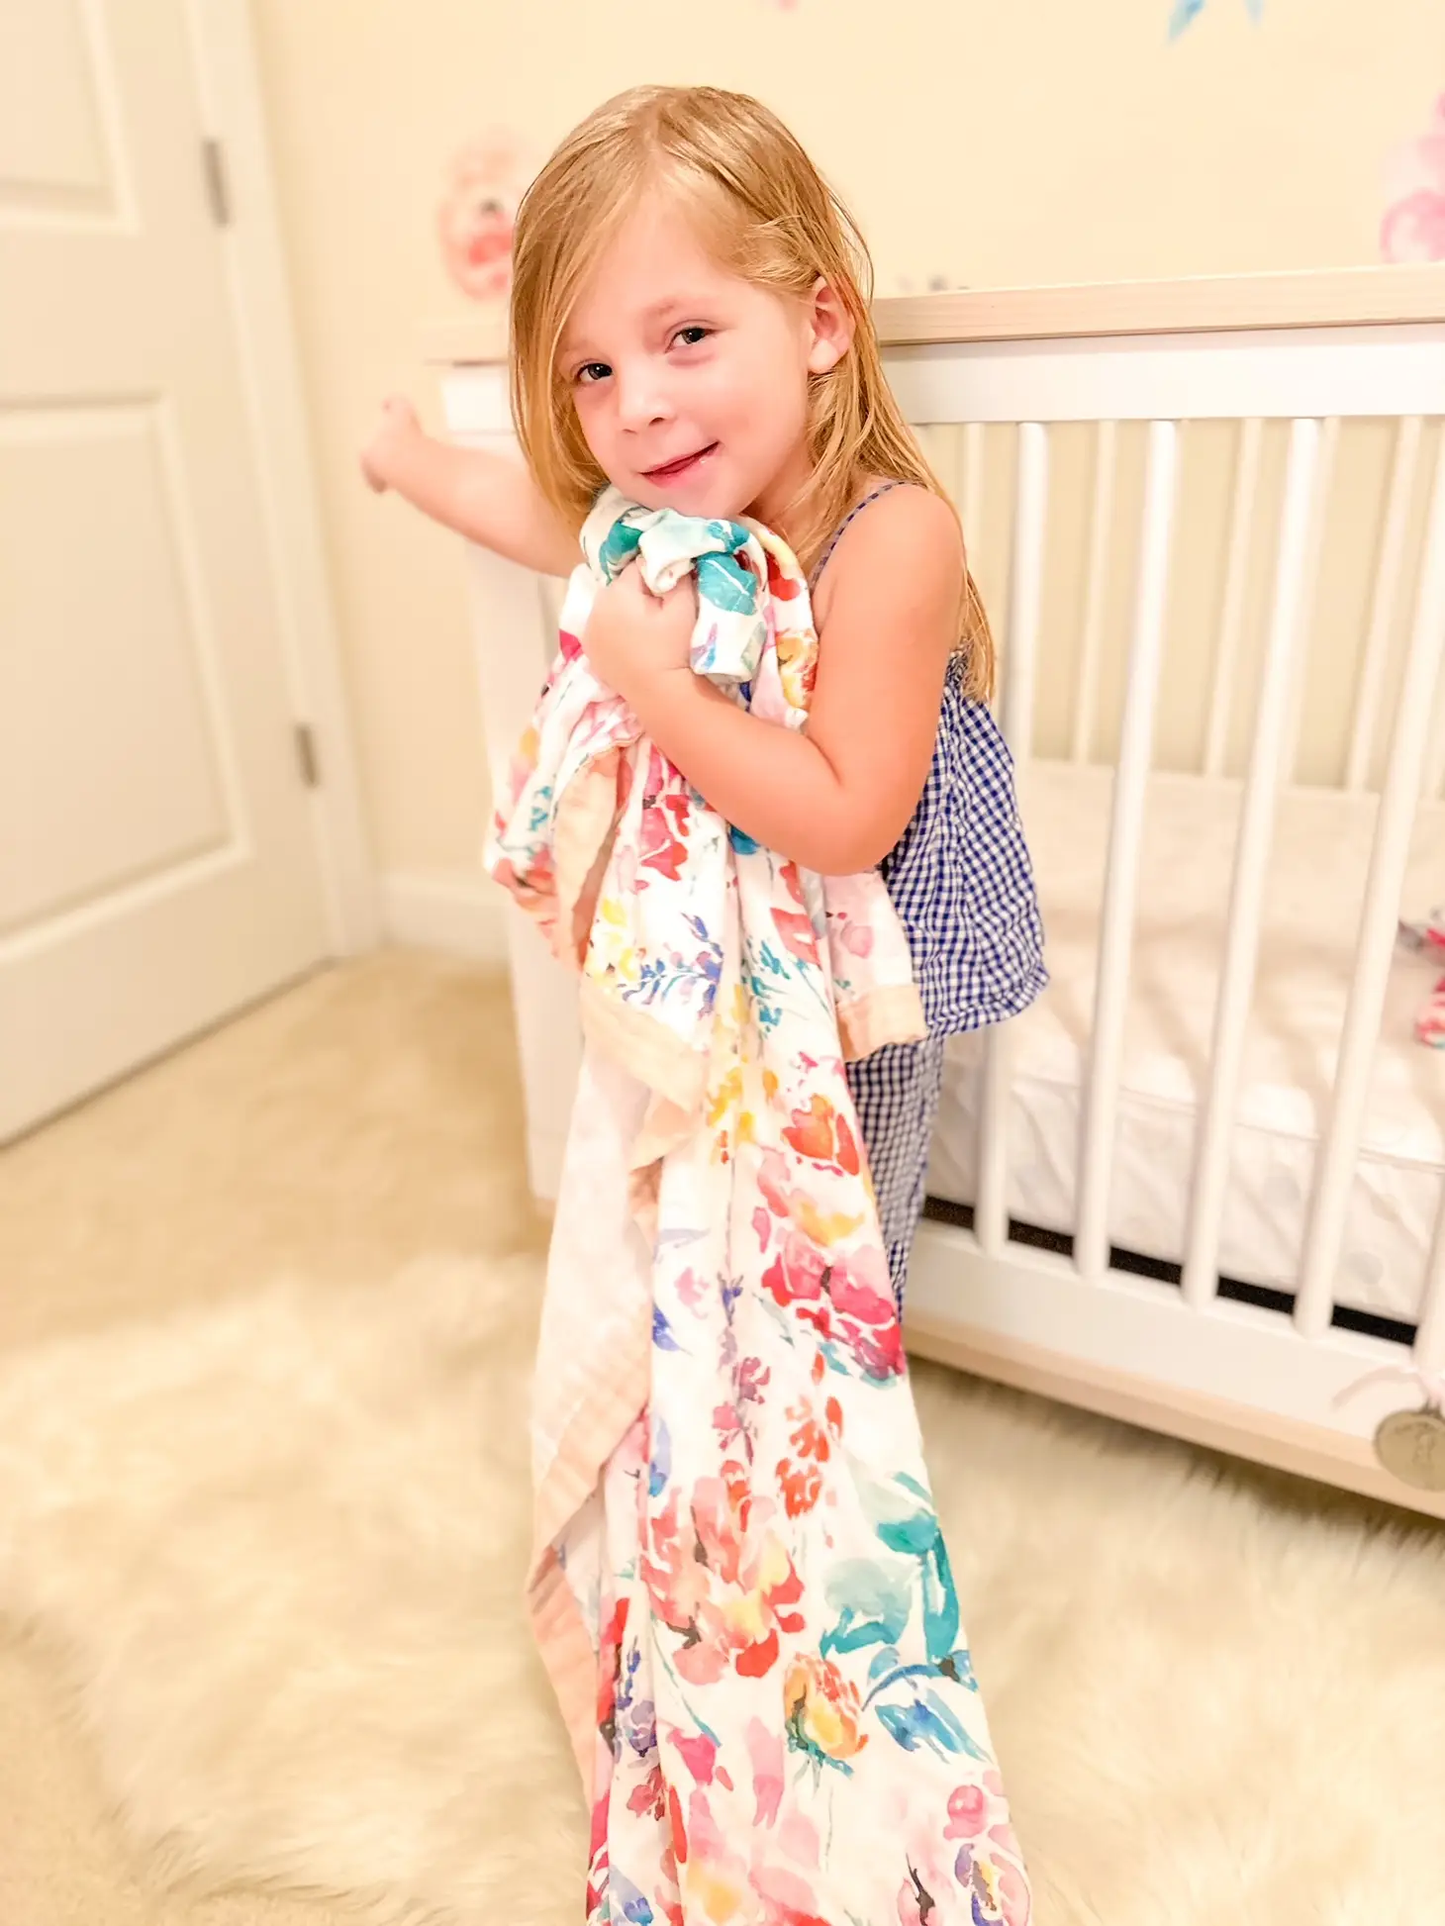 Premium Baby and Toddler Blanket - Flora - Bamboo and Cotton